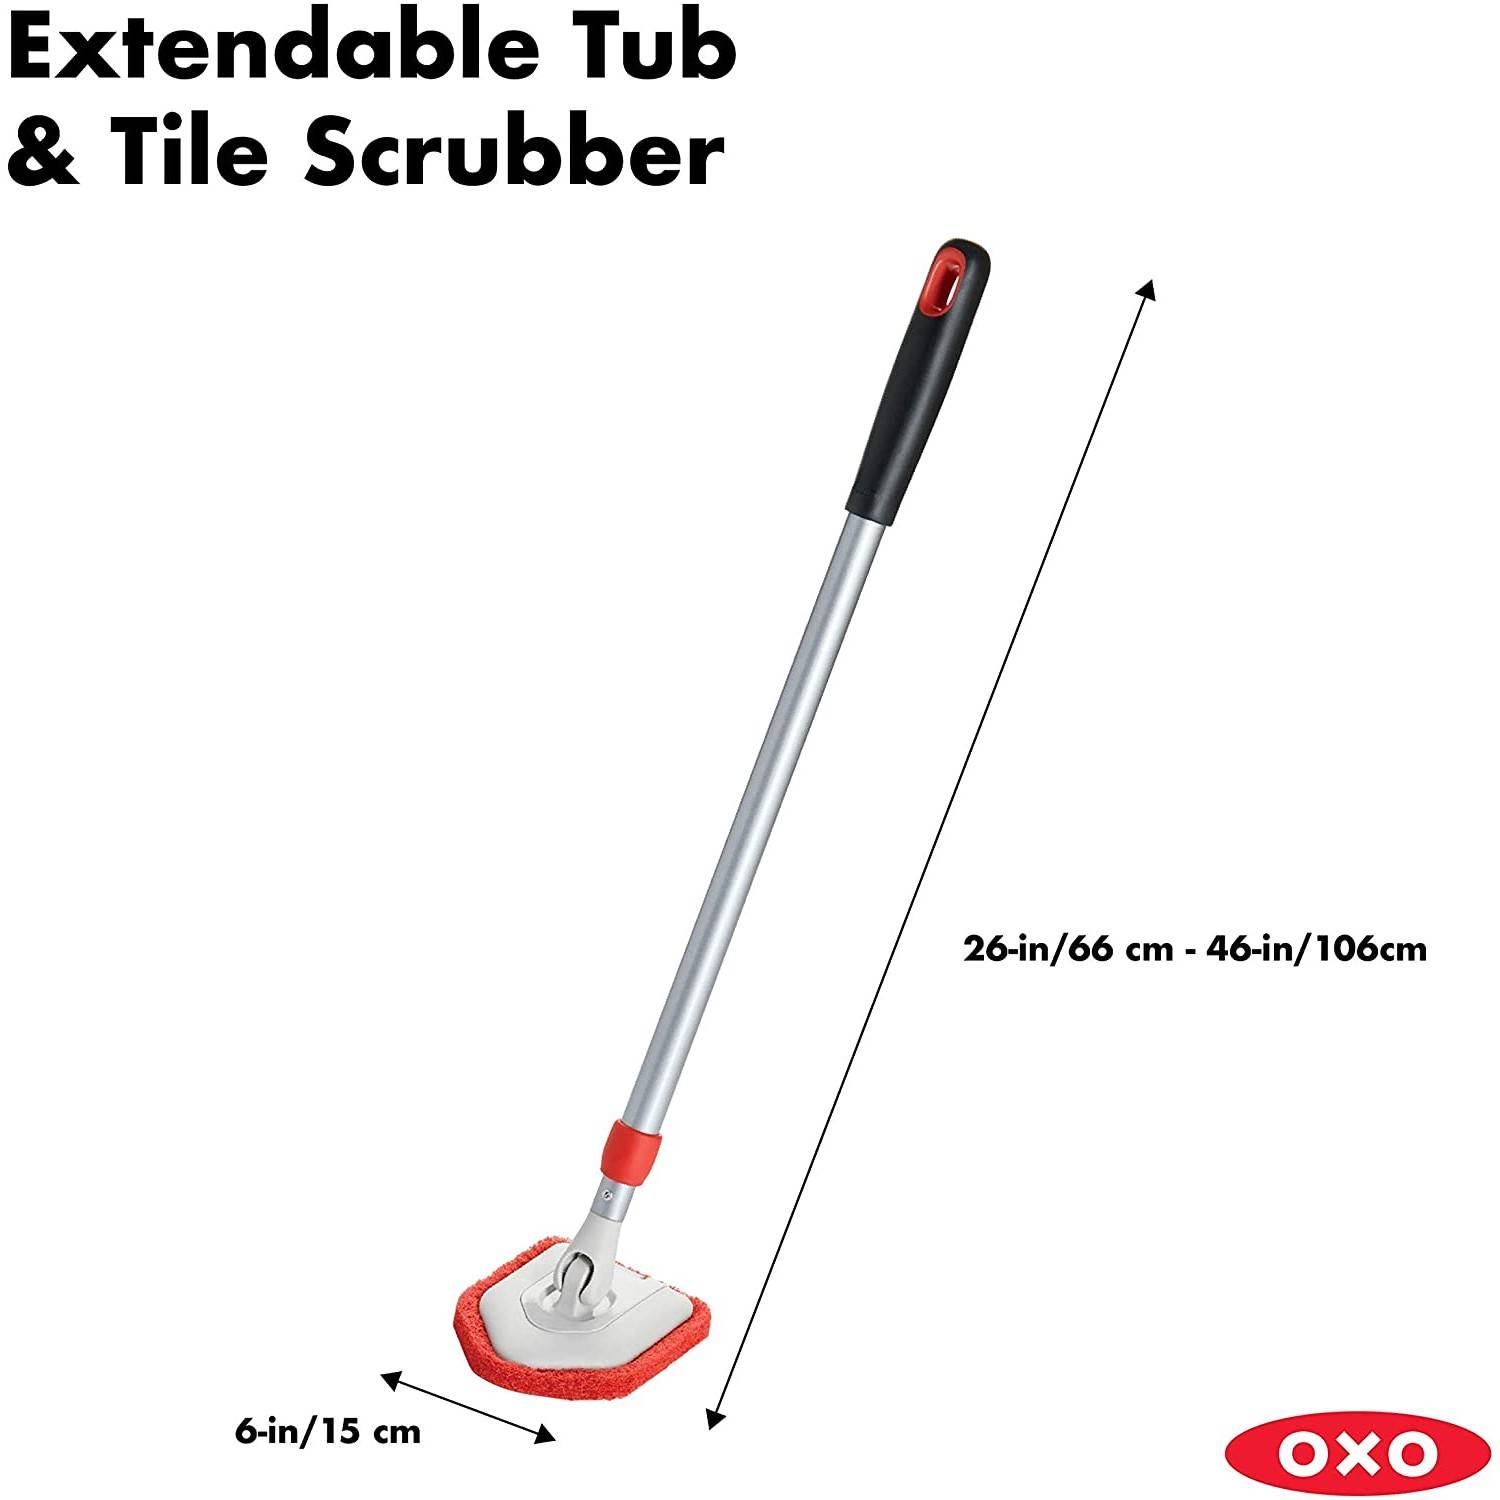 Extendable Tub & Tile Scrubber by OXO Good Grips : comfort grip handle